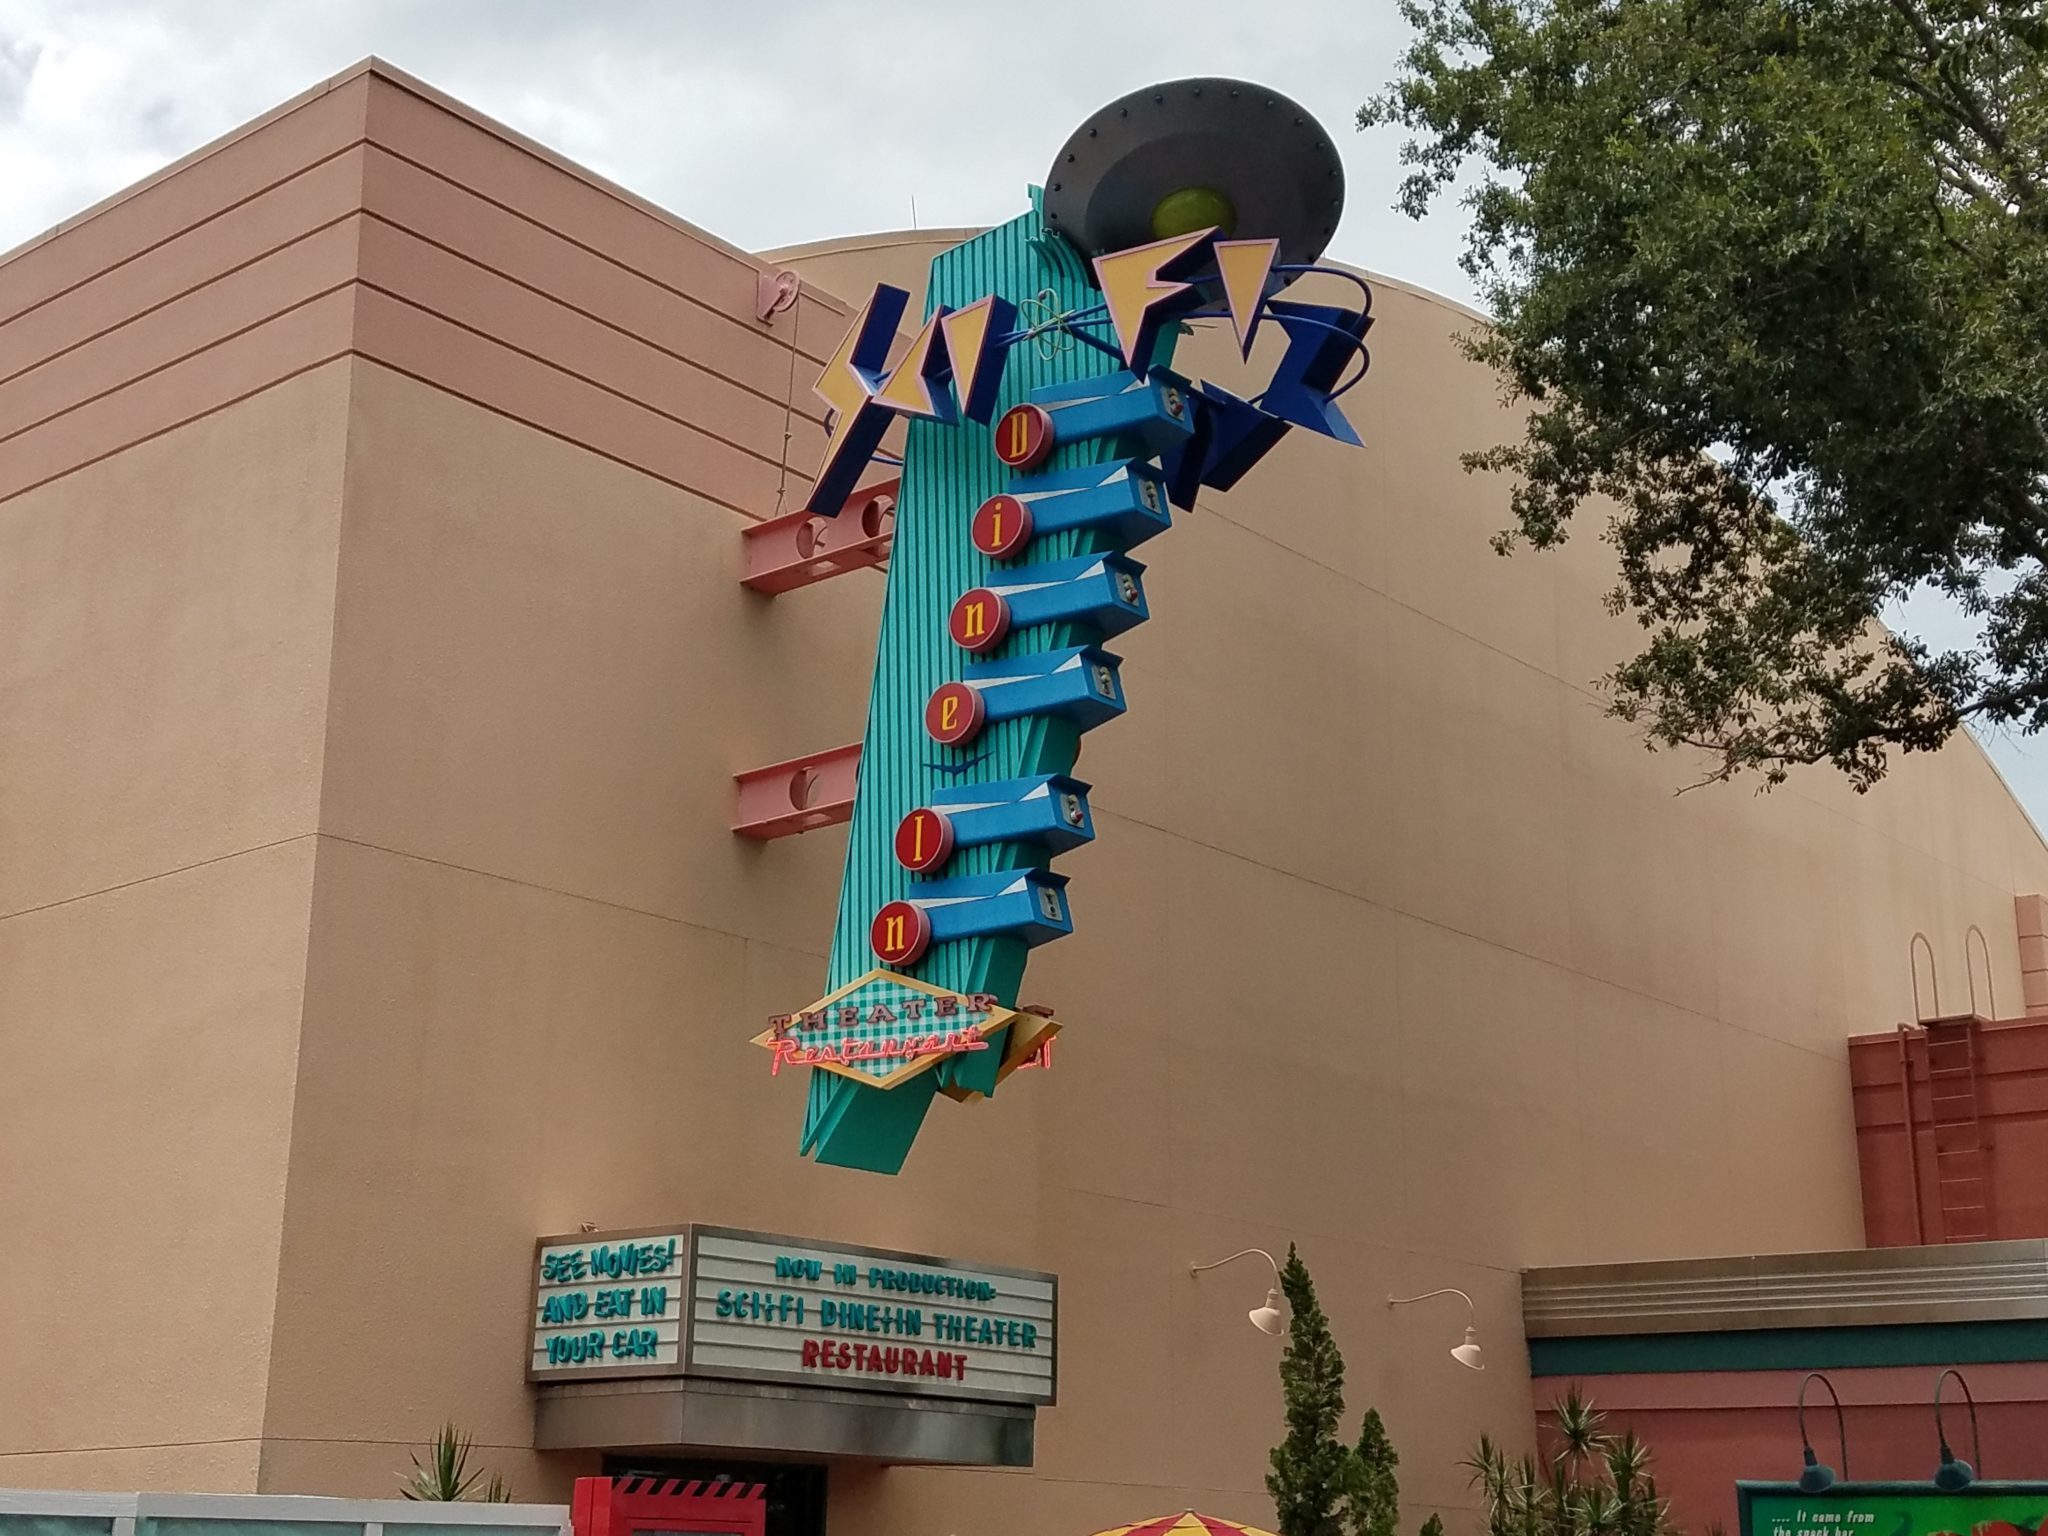 Drive In for Sci-fi Dine In Theater’s New Menu Items